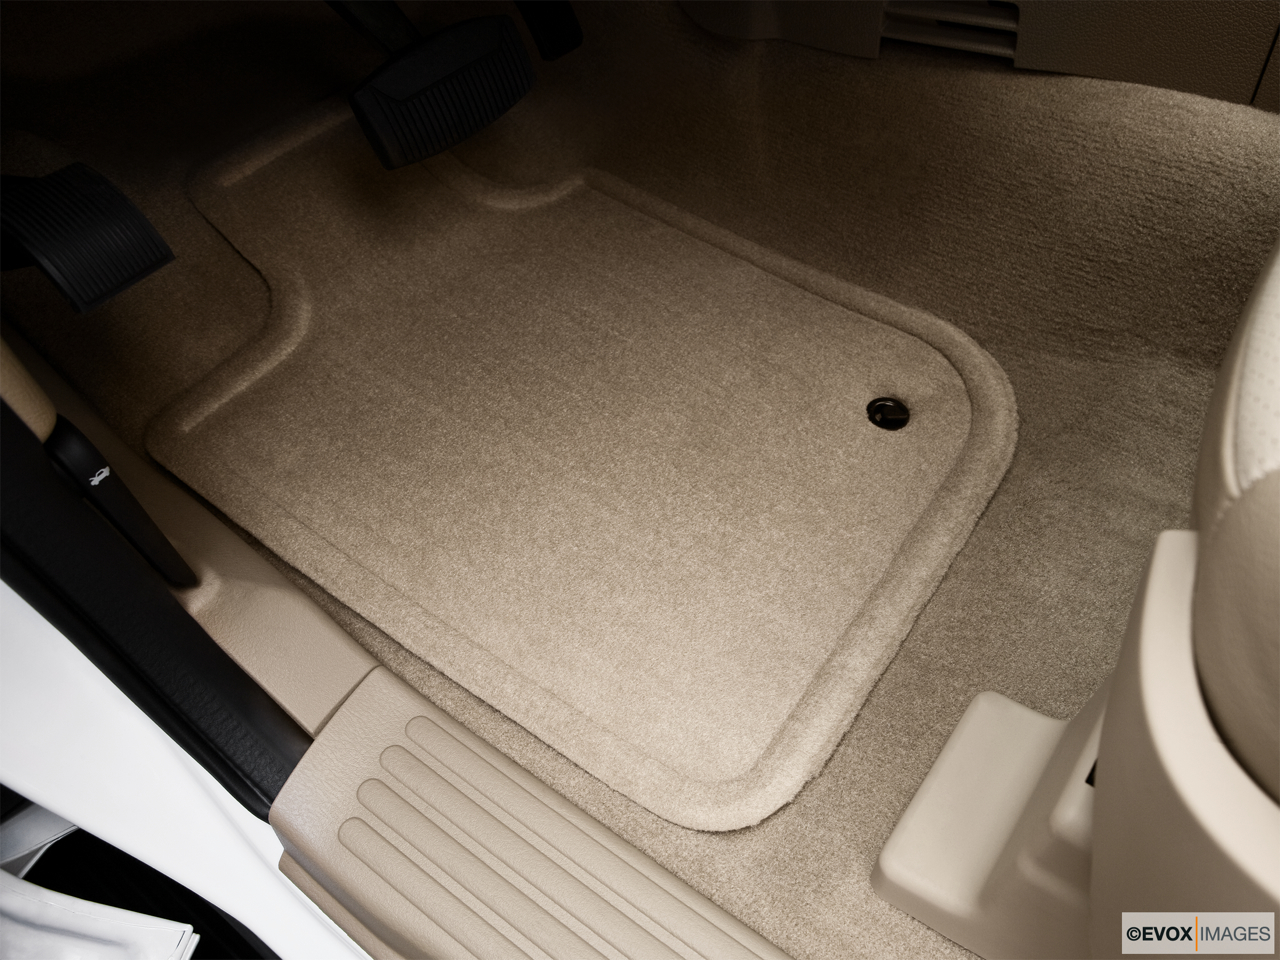 2010 Mercury Mountaineer Premier Driver's floor mat and pedals. Mid-seat level from outside looking in. 